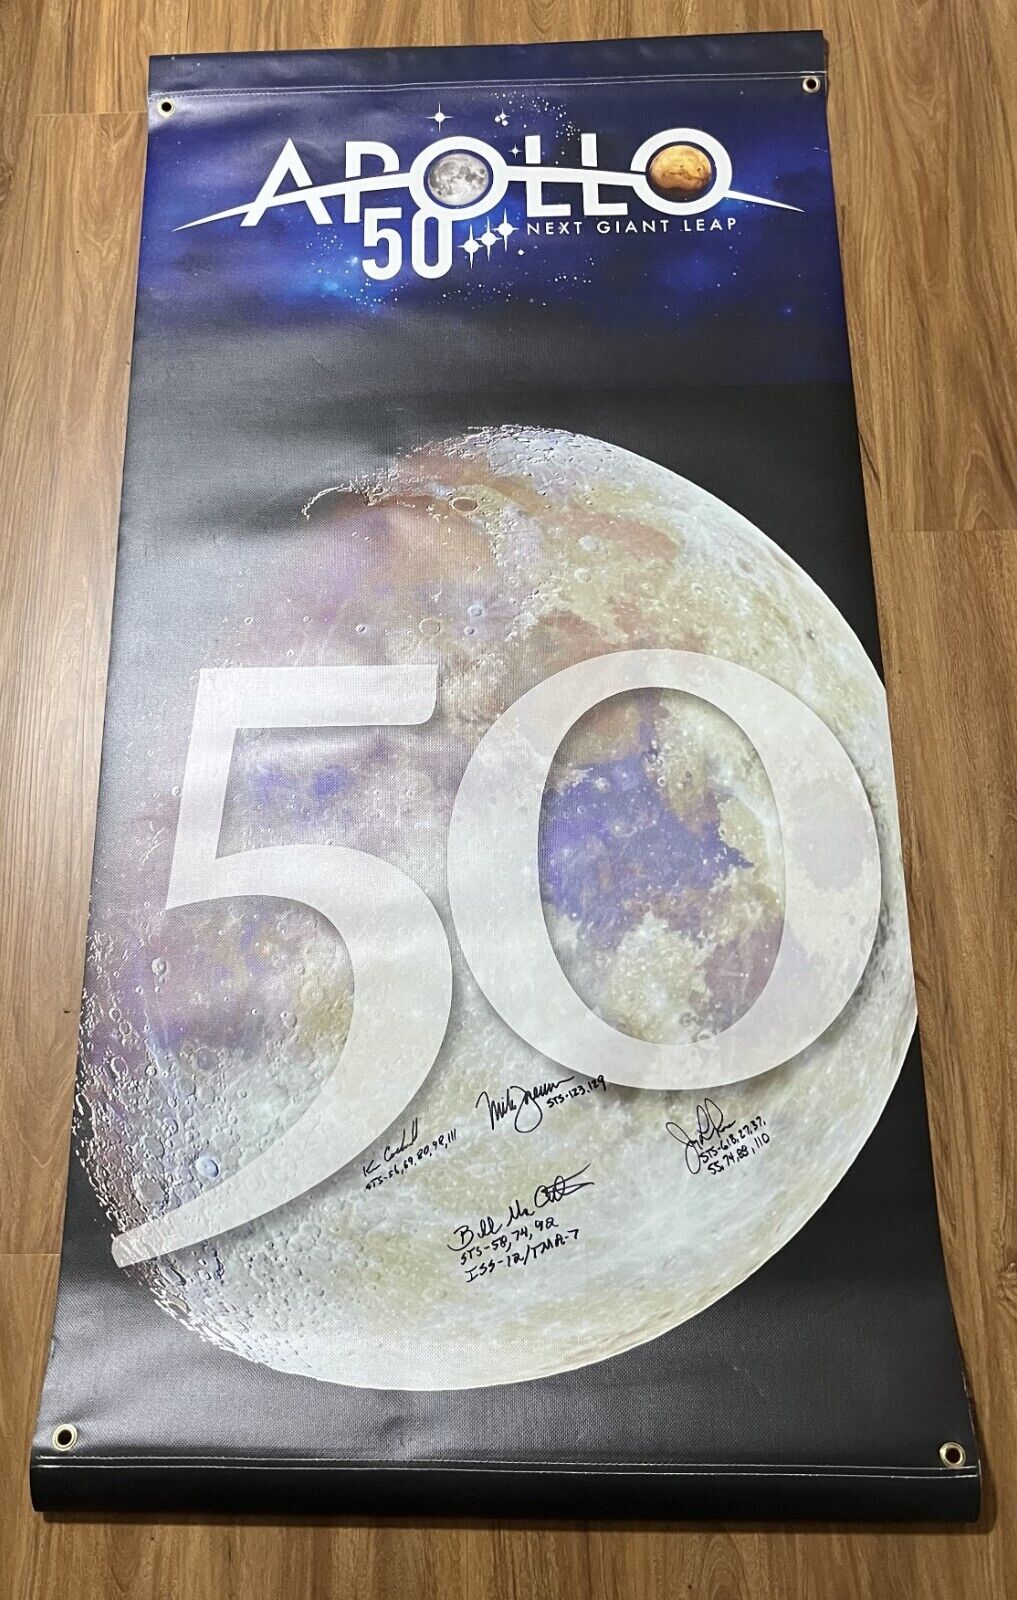 APOLLO 50 M Foreman K Cockrell Jerry L Ross Bill McArthur Signed NASA Banner